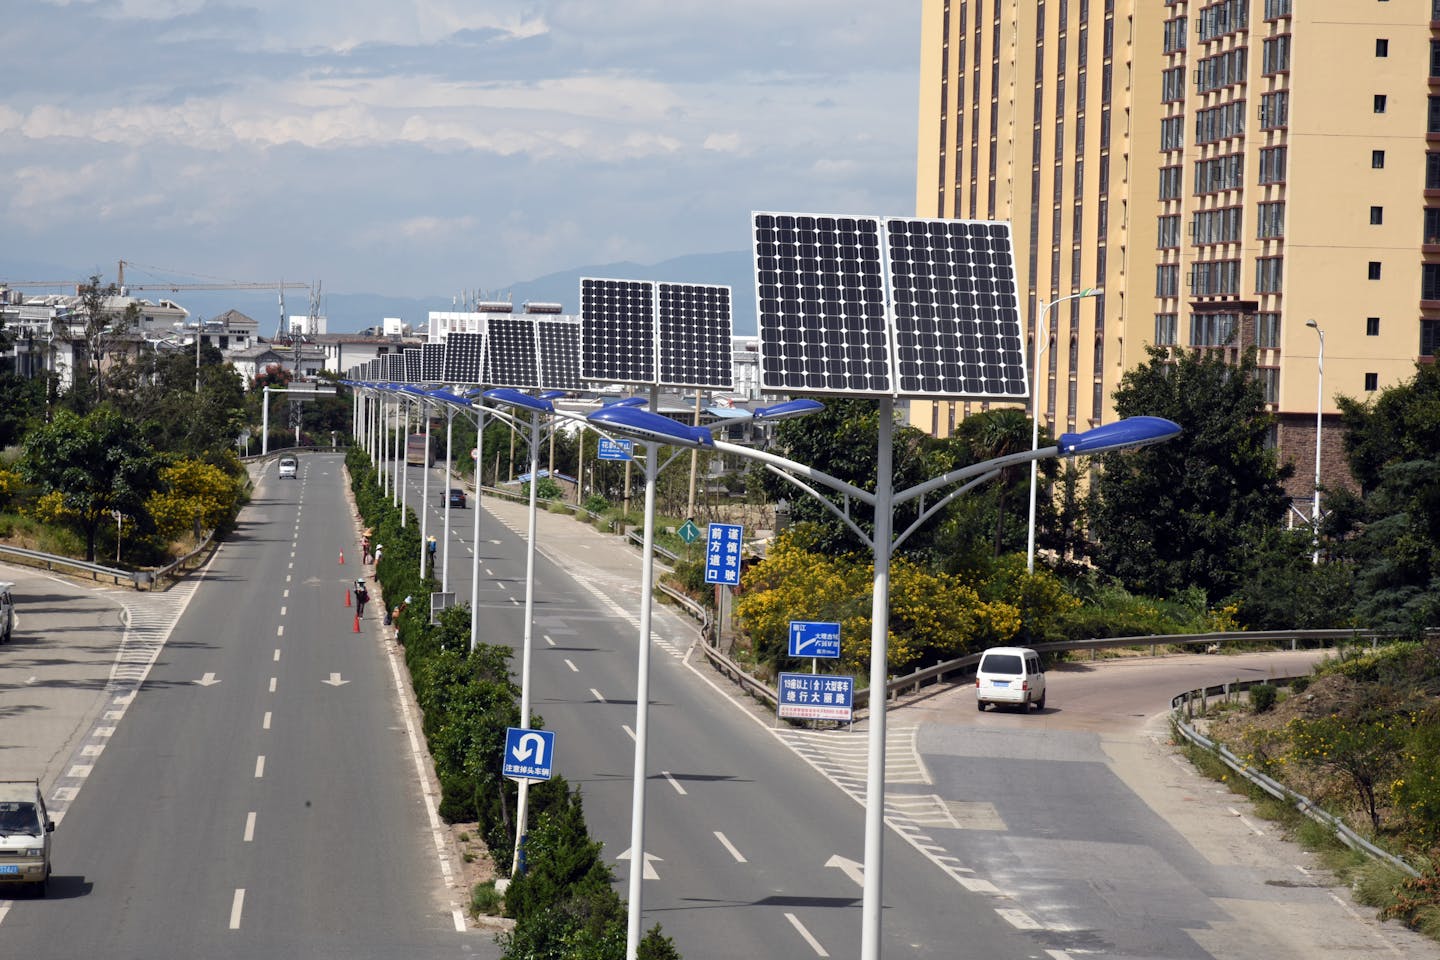 Solar panels on street lamps in Dali, China